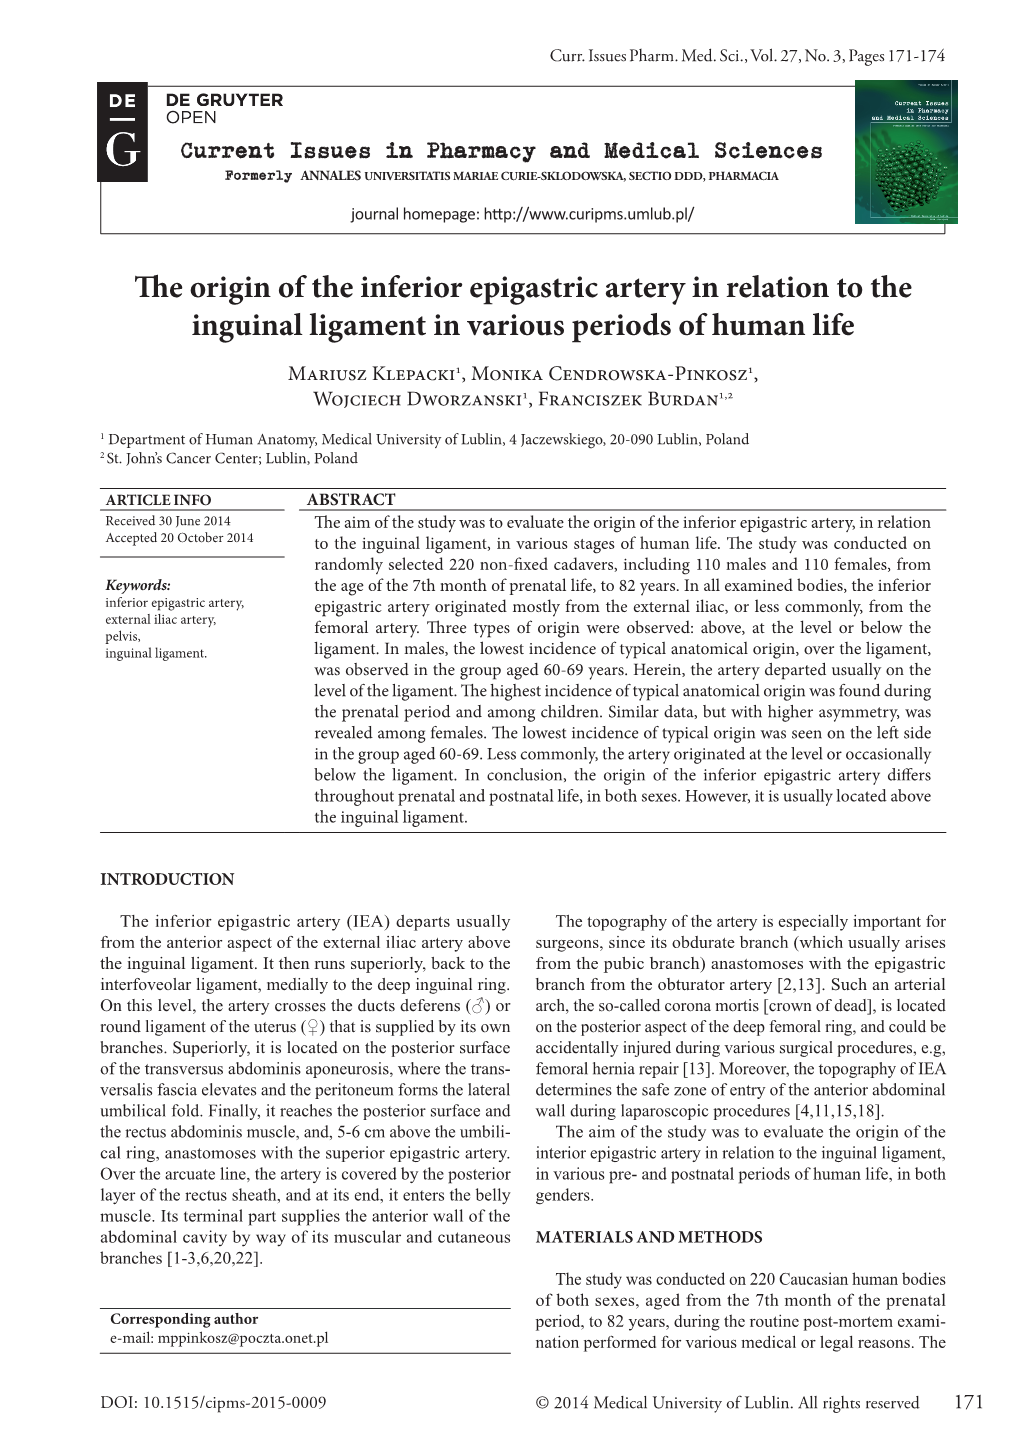 The Origin of the Inferior Epigastric Artery in Relation to the Inguinal